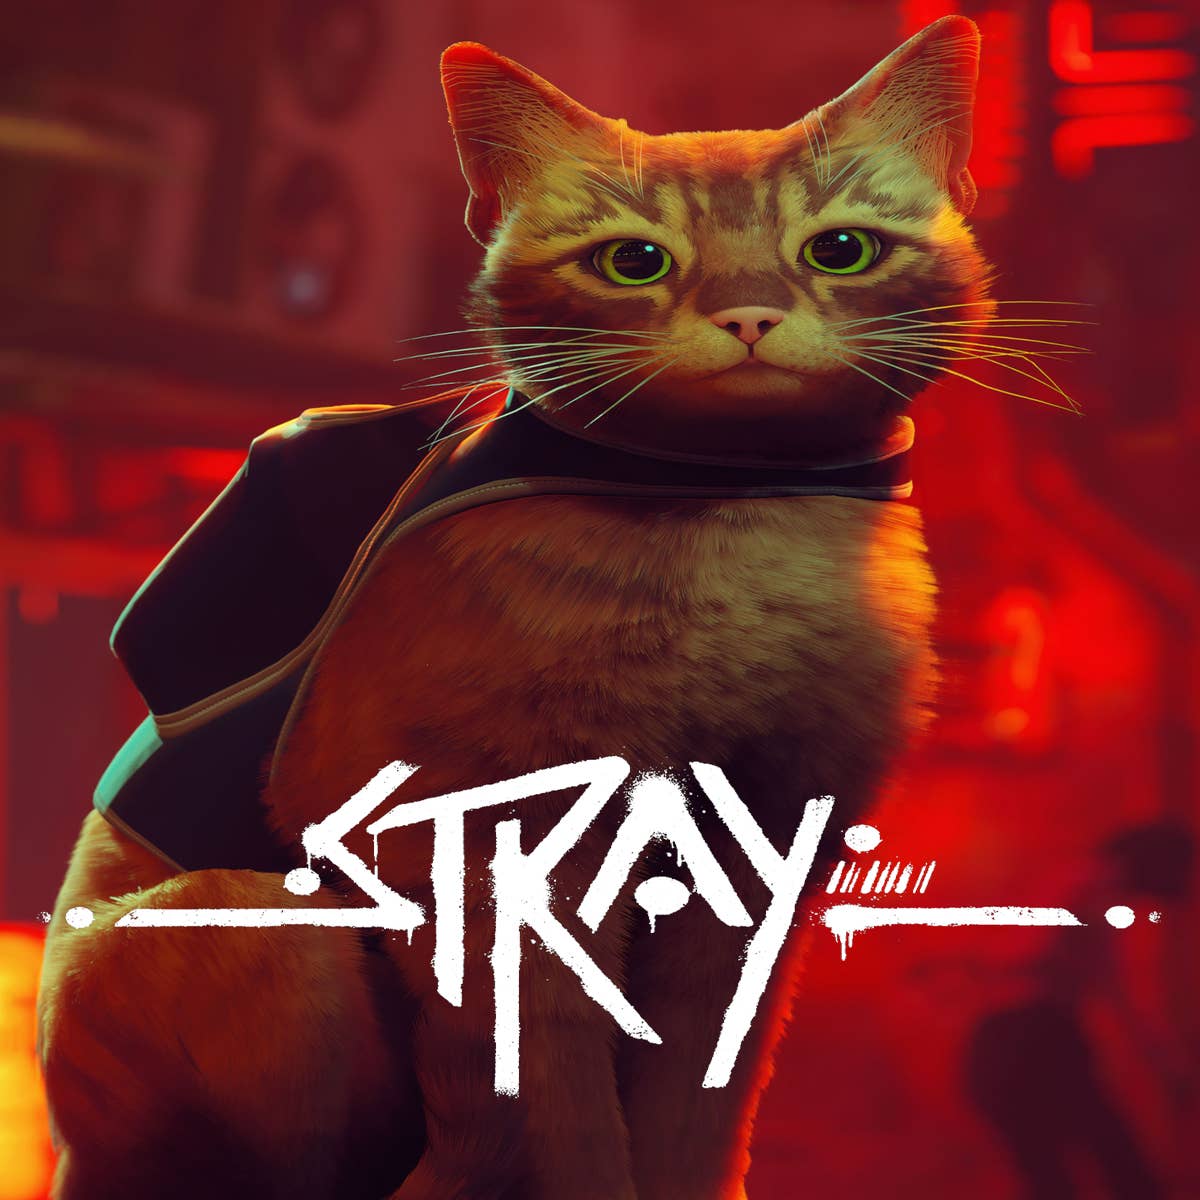 Stray plays best on PS5, as shader compilation stutters impact another  Unreal Engine game on PC